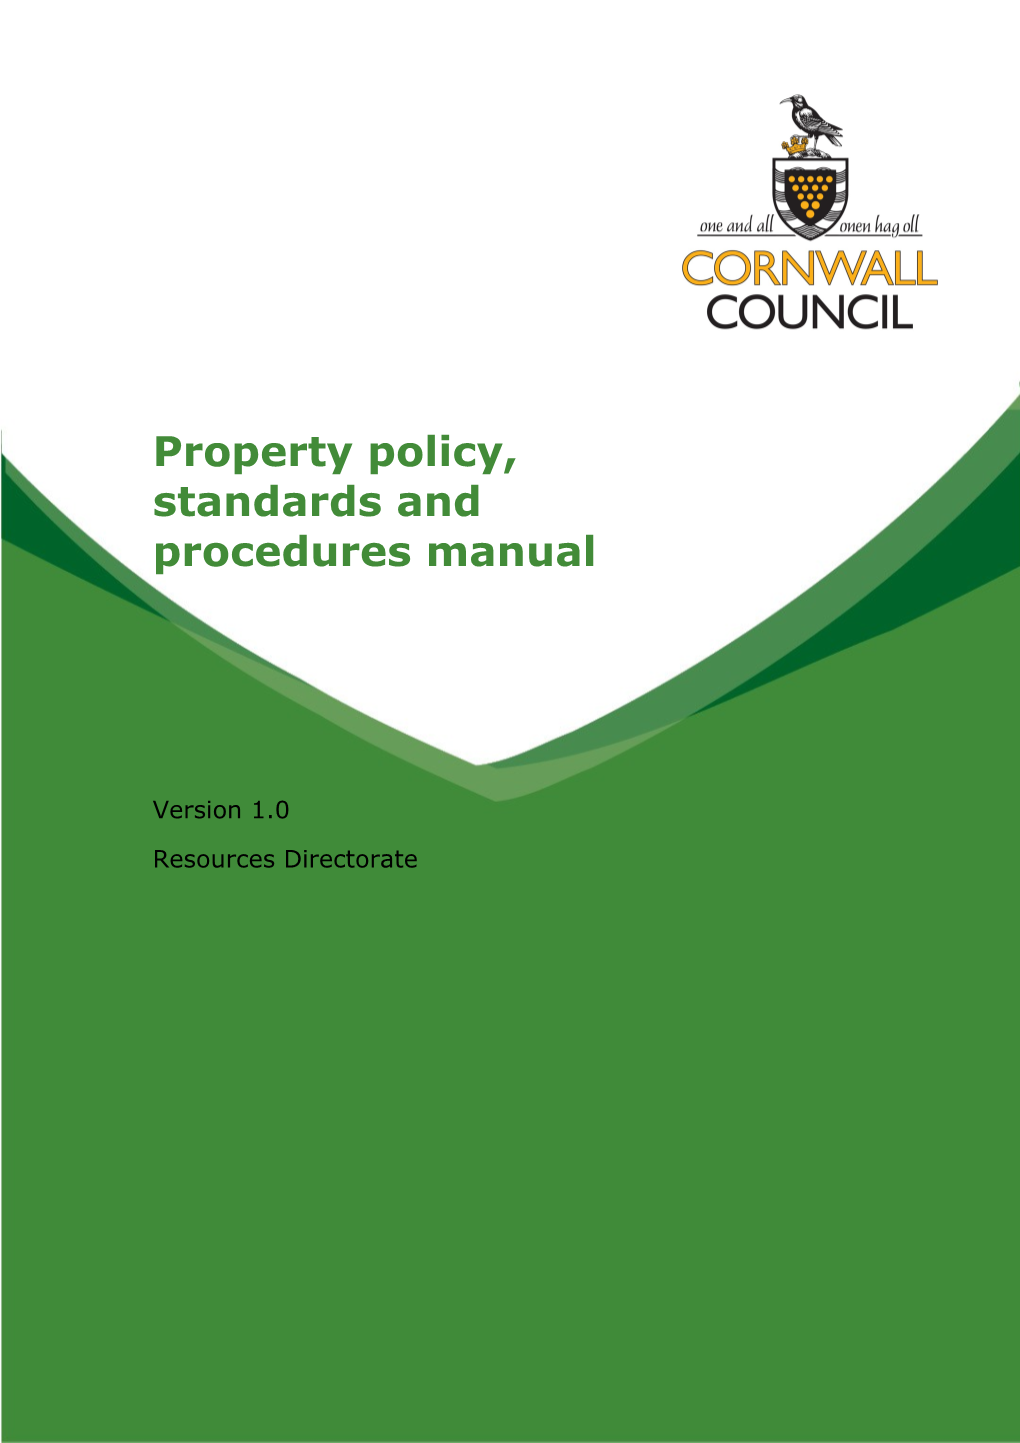 Property Policy, Standards and Procedures Manual